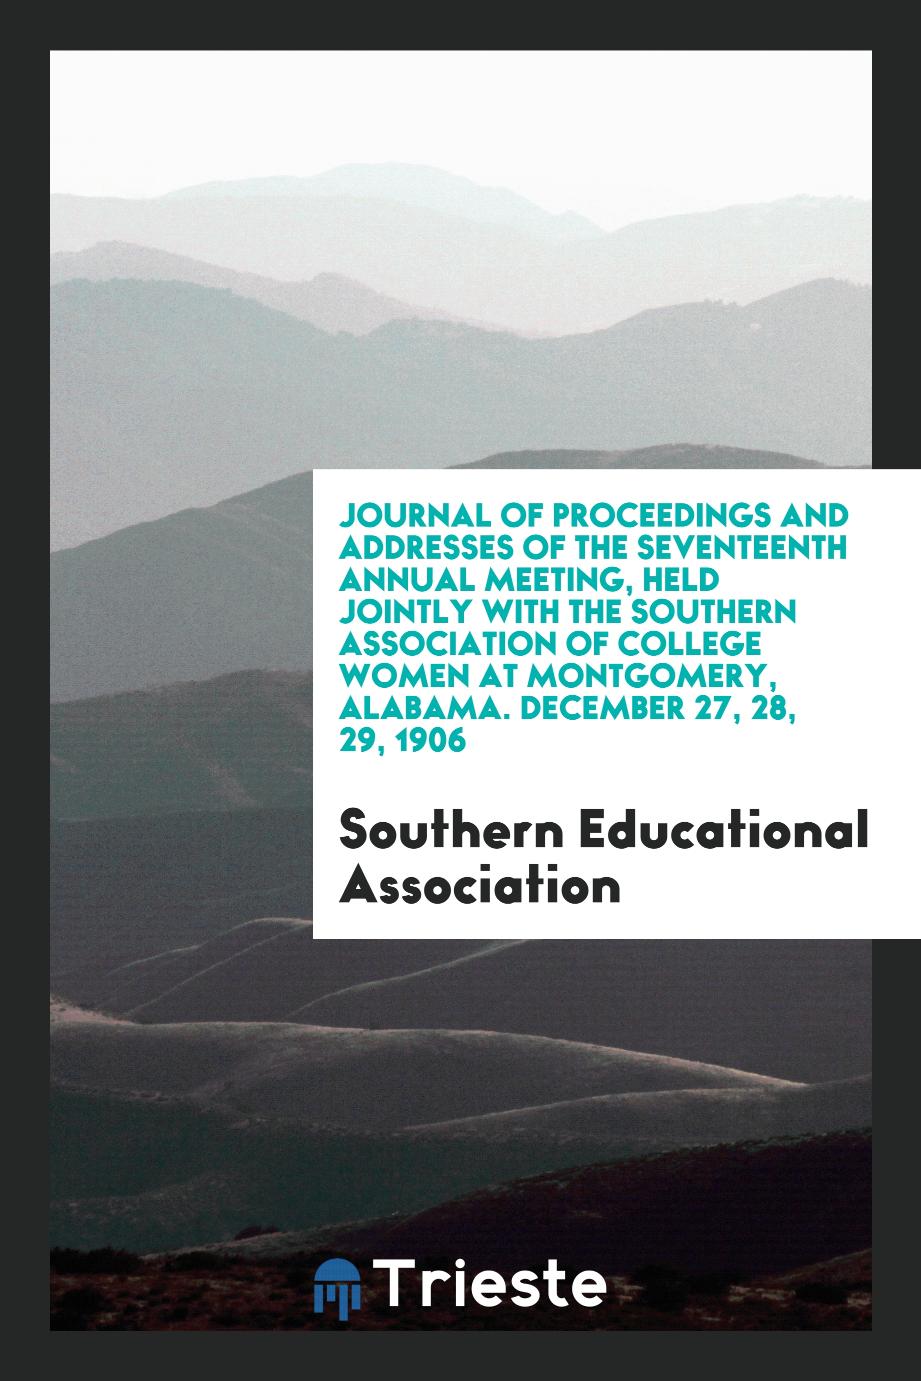 Journal of Proceedings and Addresses of the Seventeenth Annual Meeting, Held Jointly with the Southern Association of College Women at Montgomery, Alabama. December 27, 28, 29, 1906